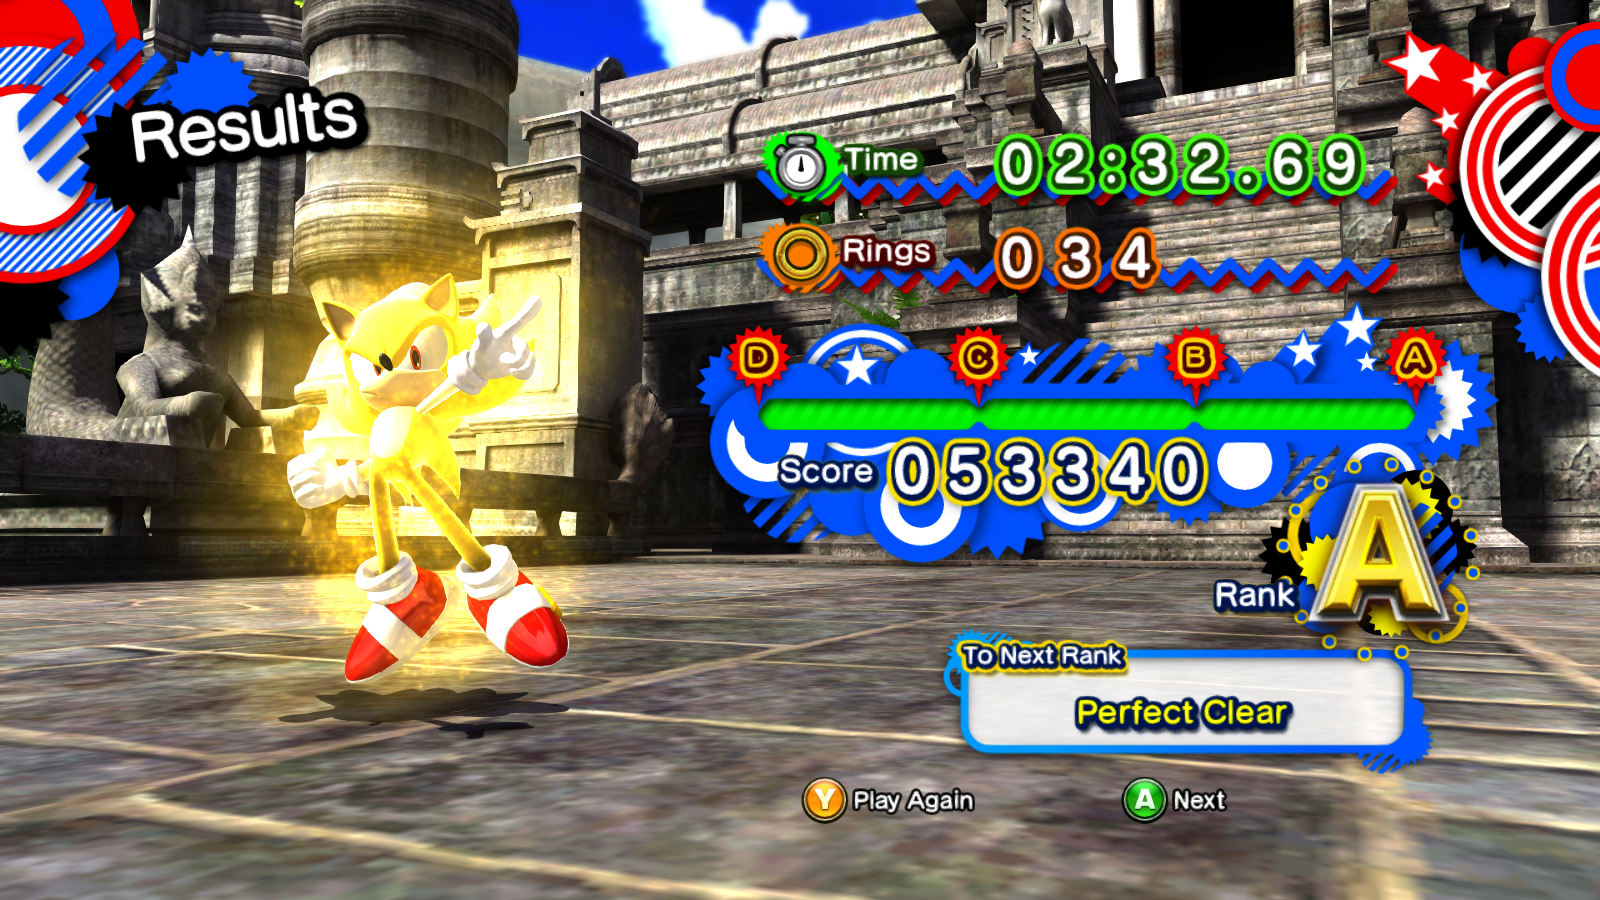 Sonic Generations Unleashed Project para Windows - Baixe